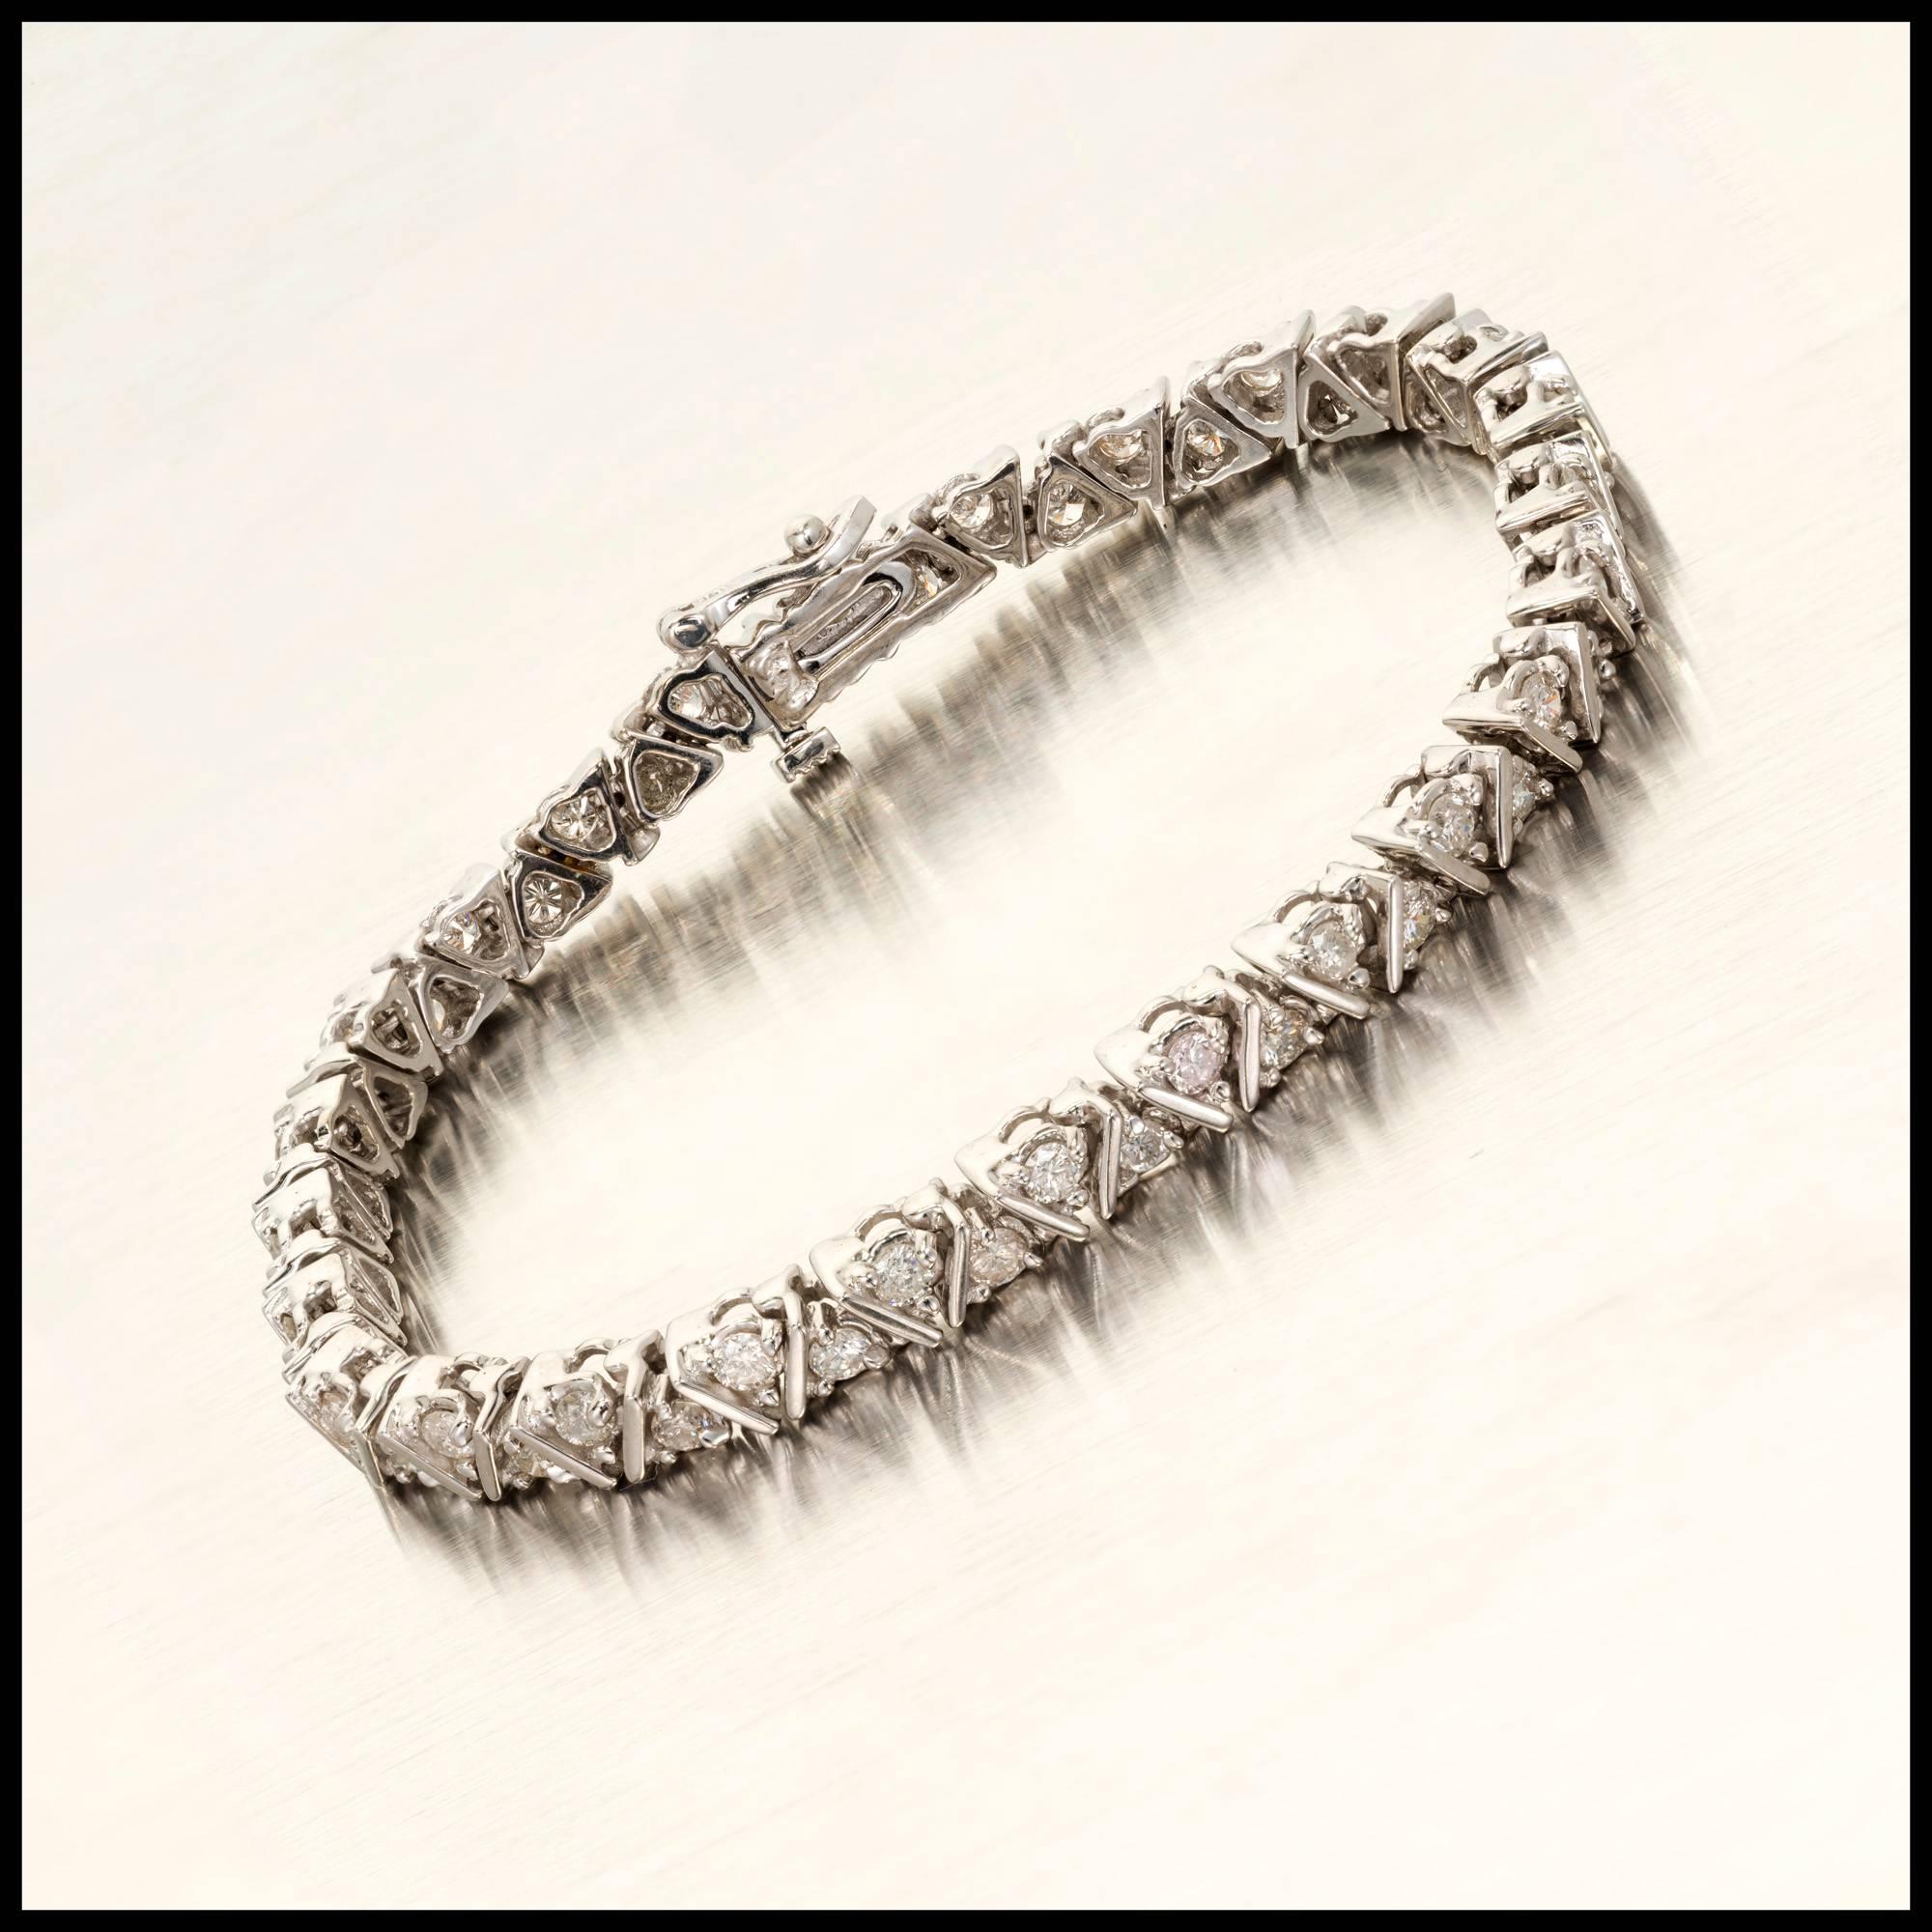 Estate 2 row design 14k white gold Diamond bracelet. Built in secure catch and side lock safety.

52 round full cut Diamonds, approx. total weight 2.00cts, I, SI1 – I1
14k white gold
18.0 grams
Tested and stamped: 14k
Length: 7 inches – Width: